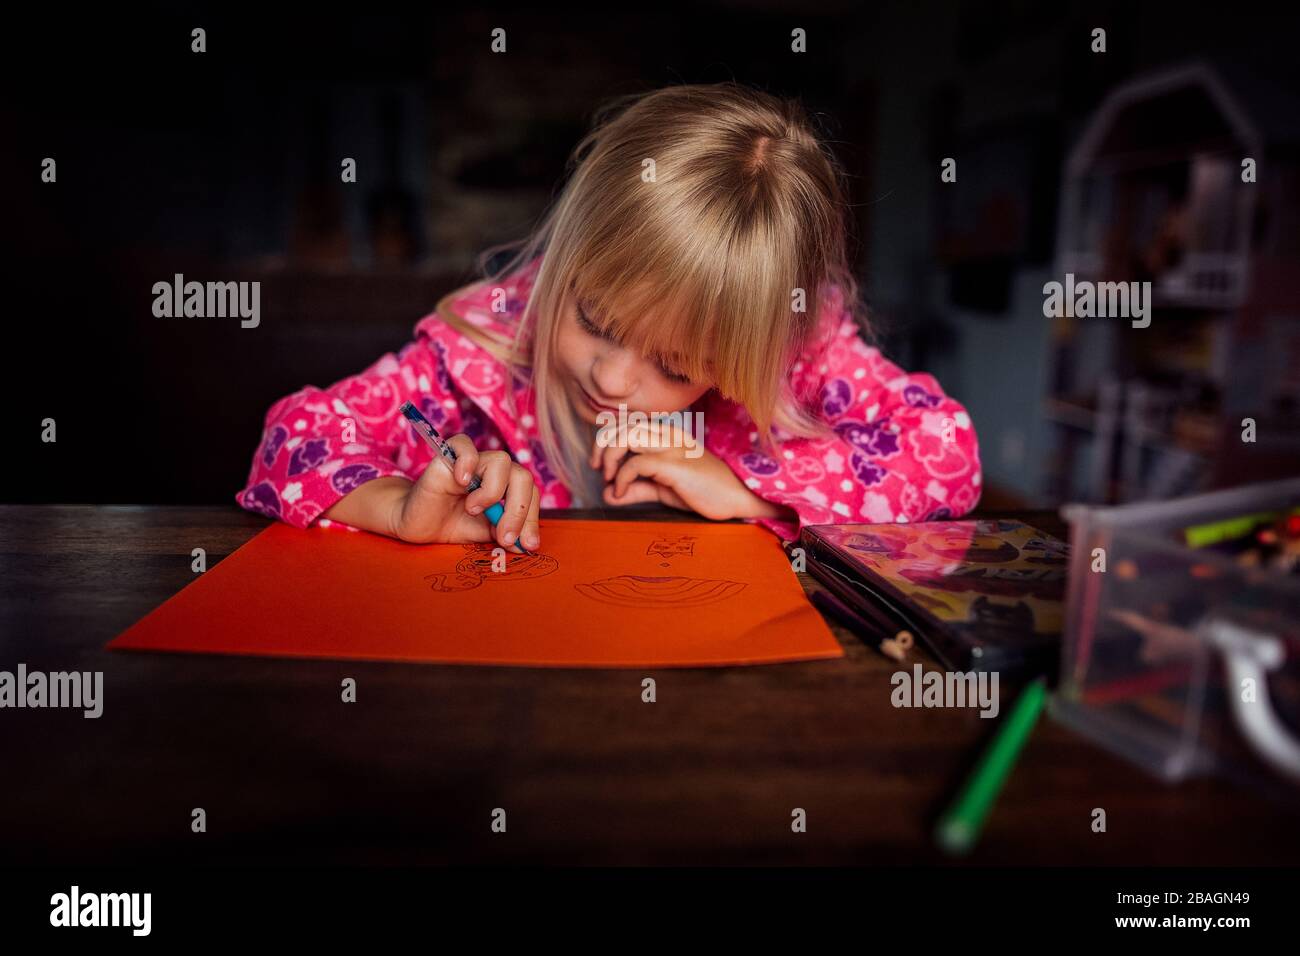 Little blond haired girl drawing a picture at a table on a sunny day Stock Photo